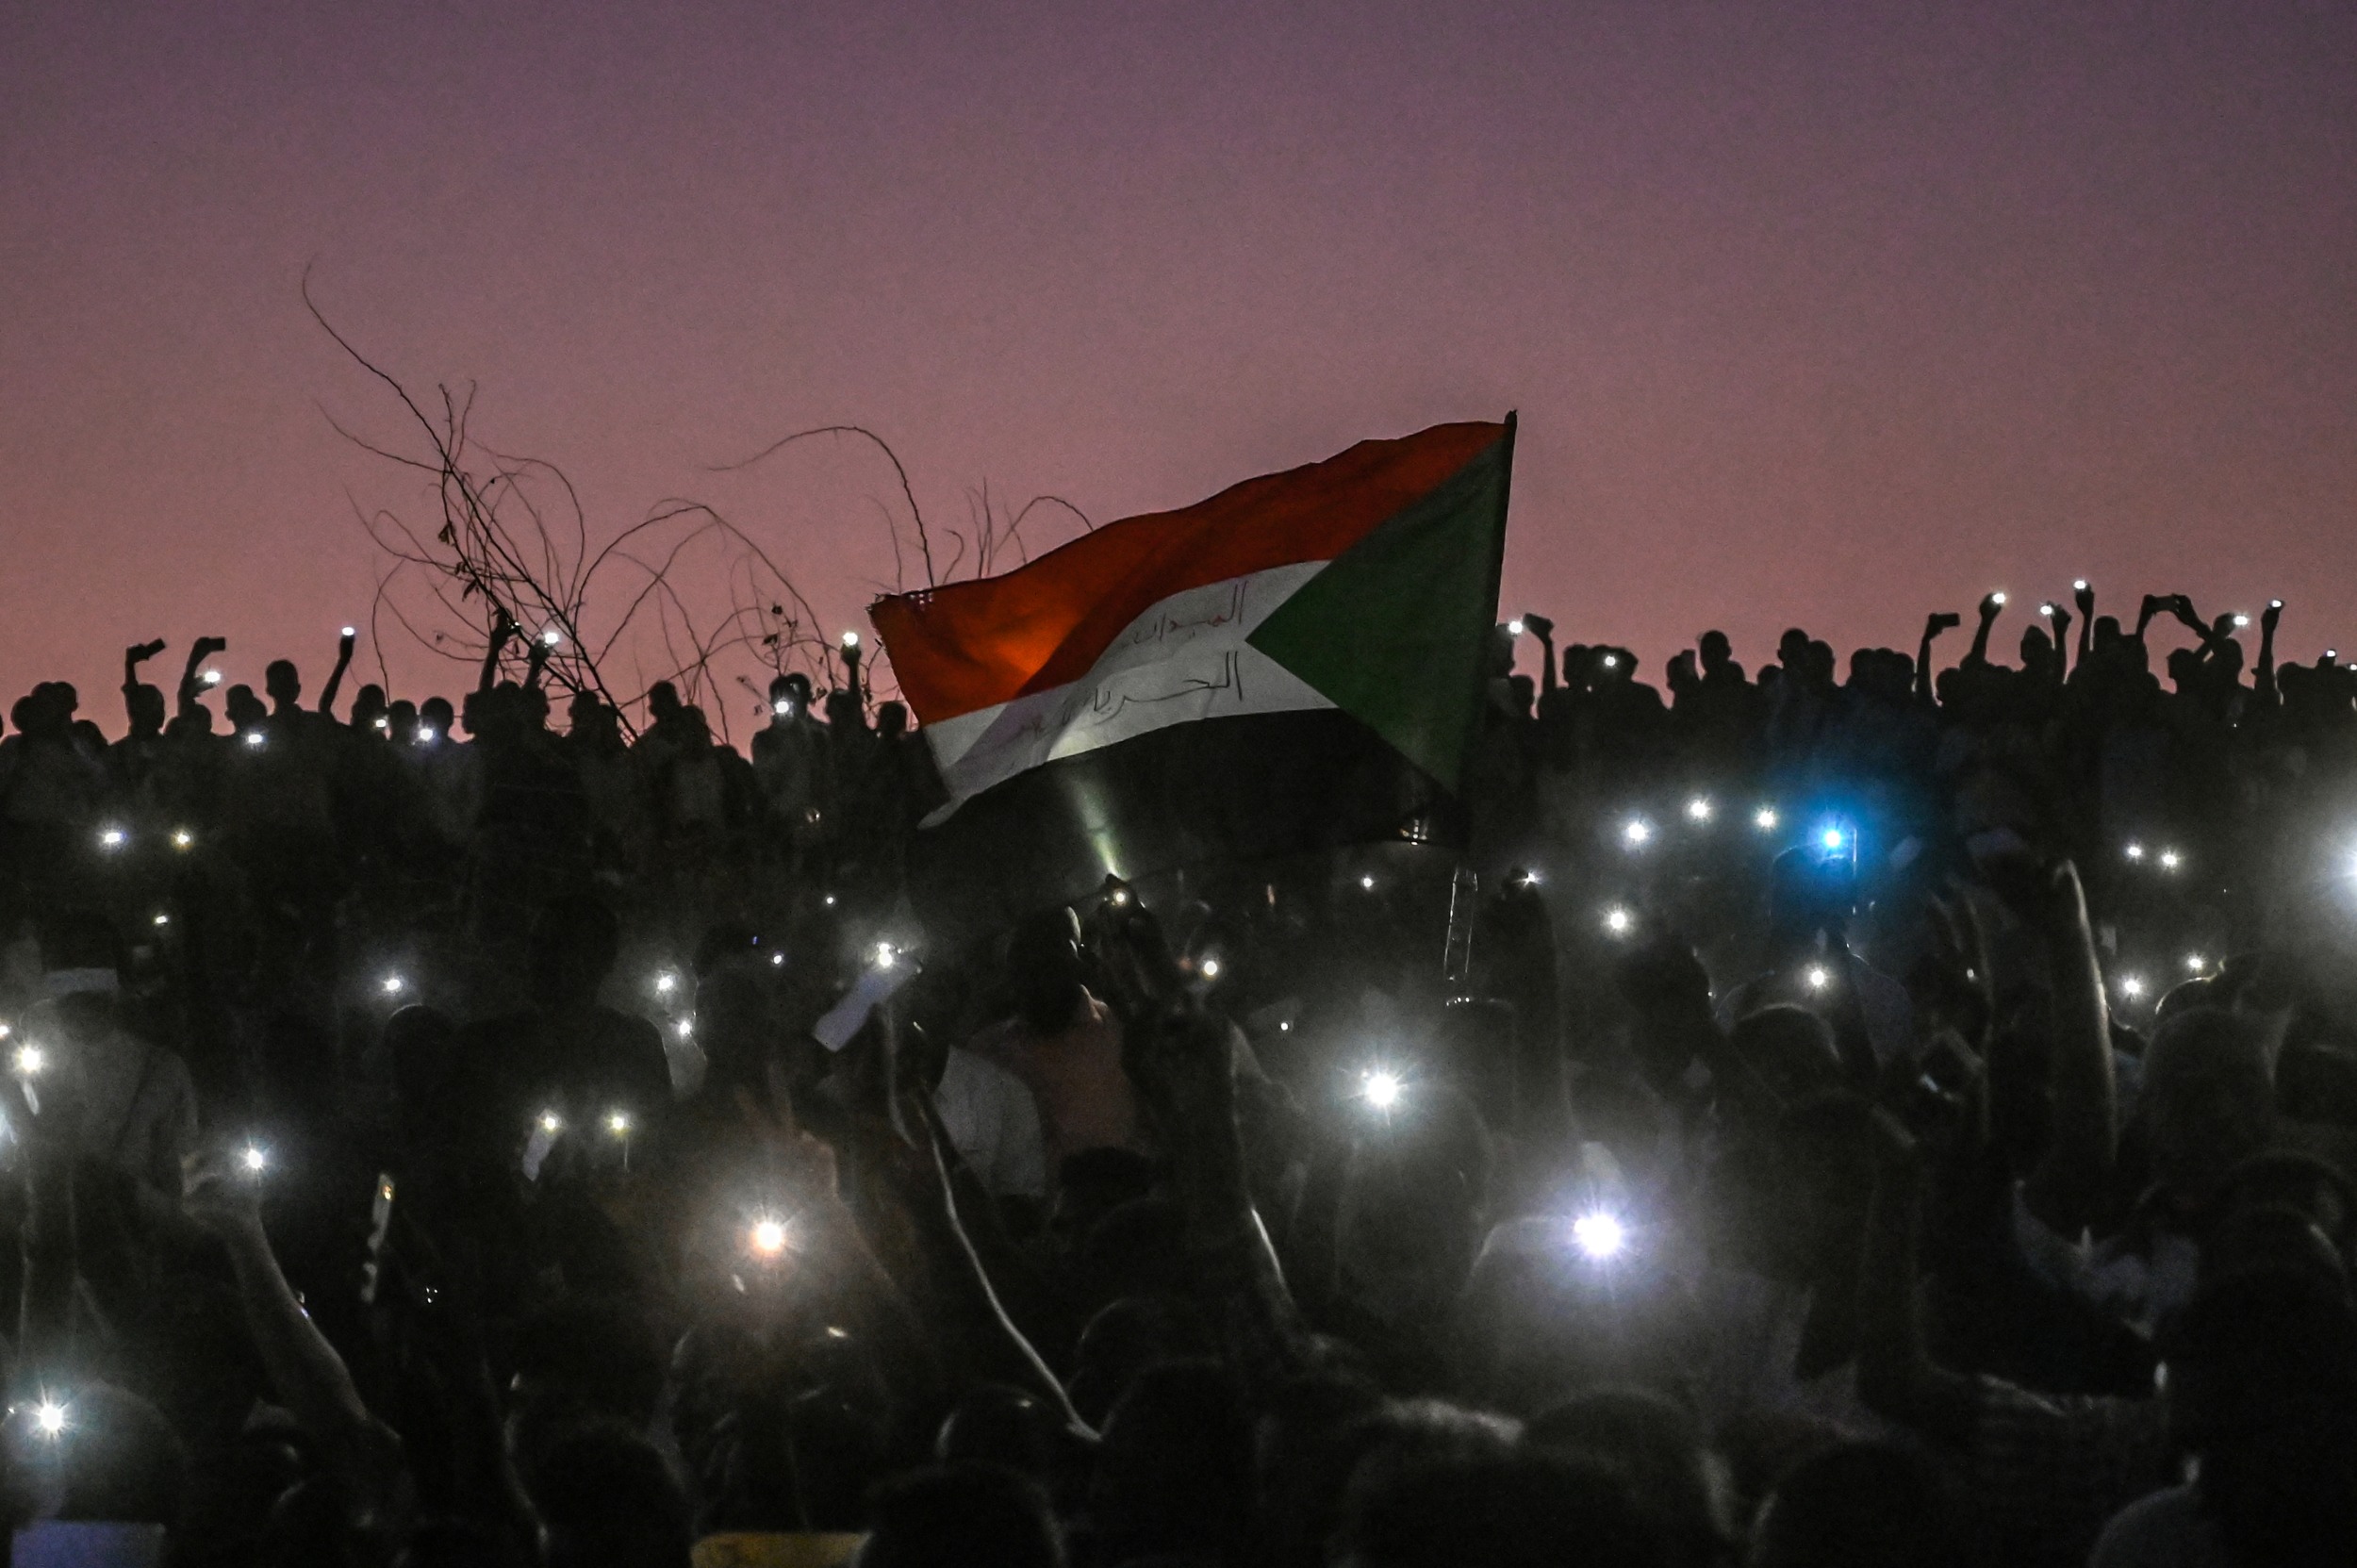 Sudanese protesters open their smartphones lights during a protest outside the army headquarters in the capital Khartoum on 21 April 2019 (AFP)